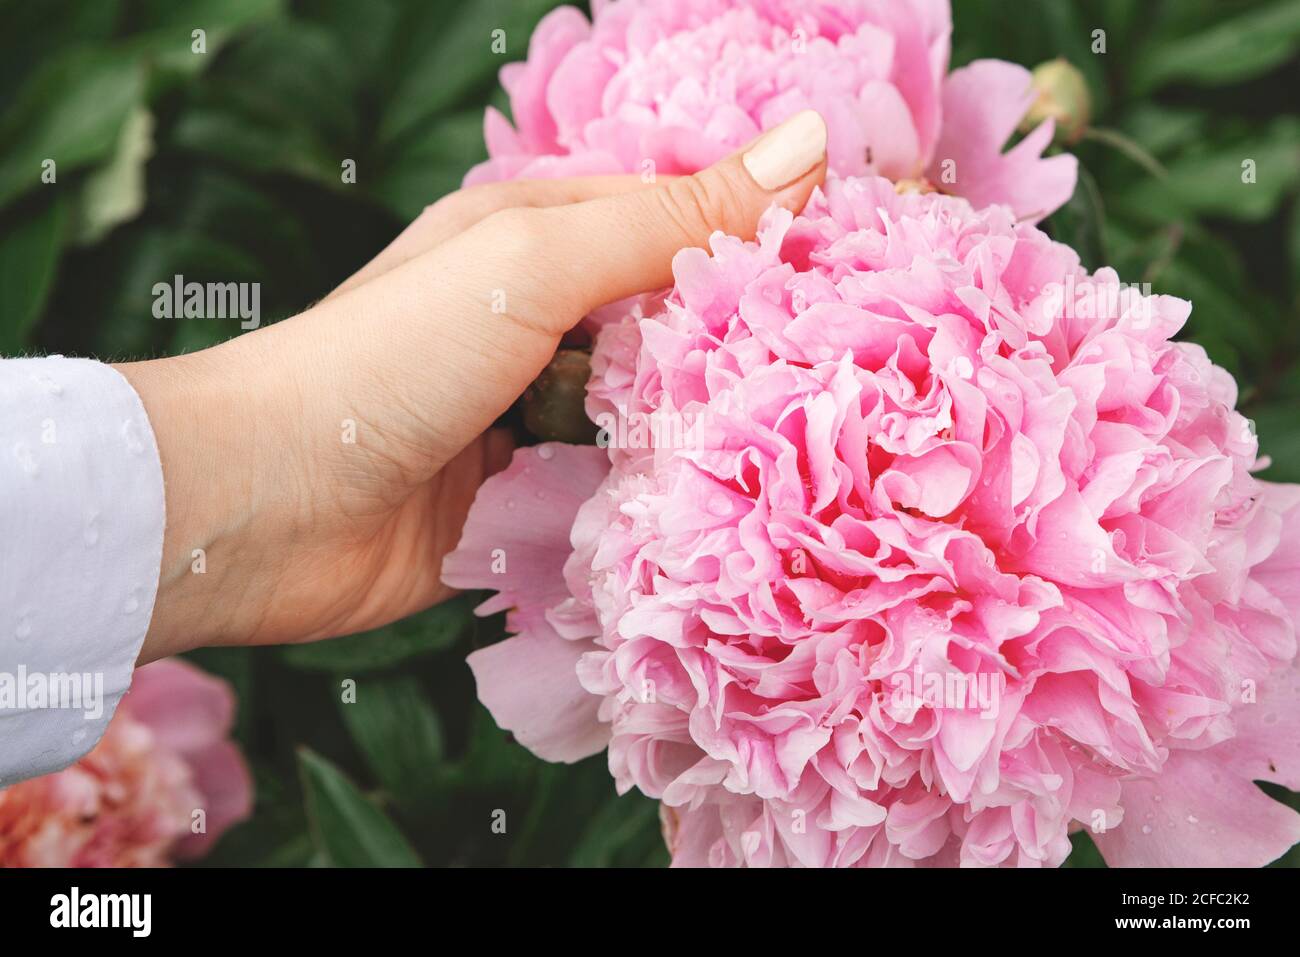 Woman hand and pink peony flower in garden. Blooming peonies bush with buds and pastel pink petals. Vintage filter. Concept of feminine beauty, care, Stock Photo